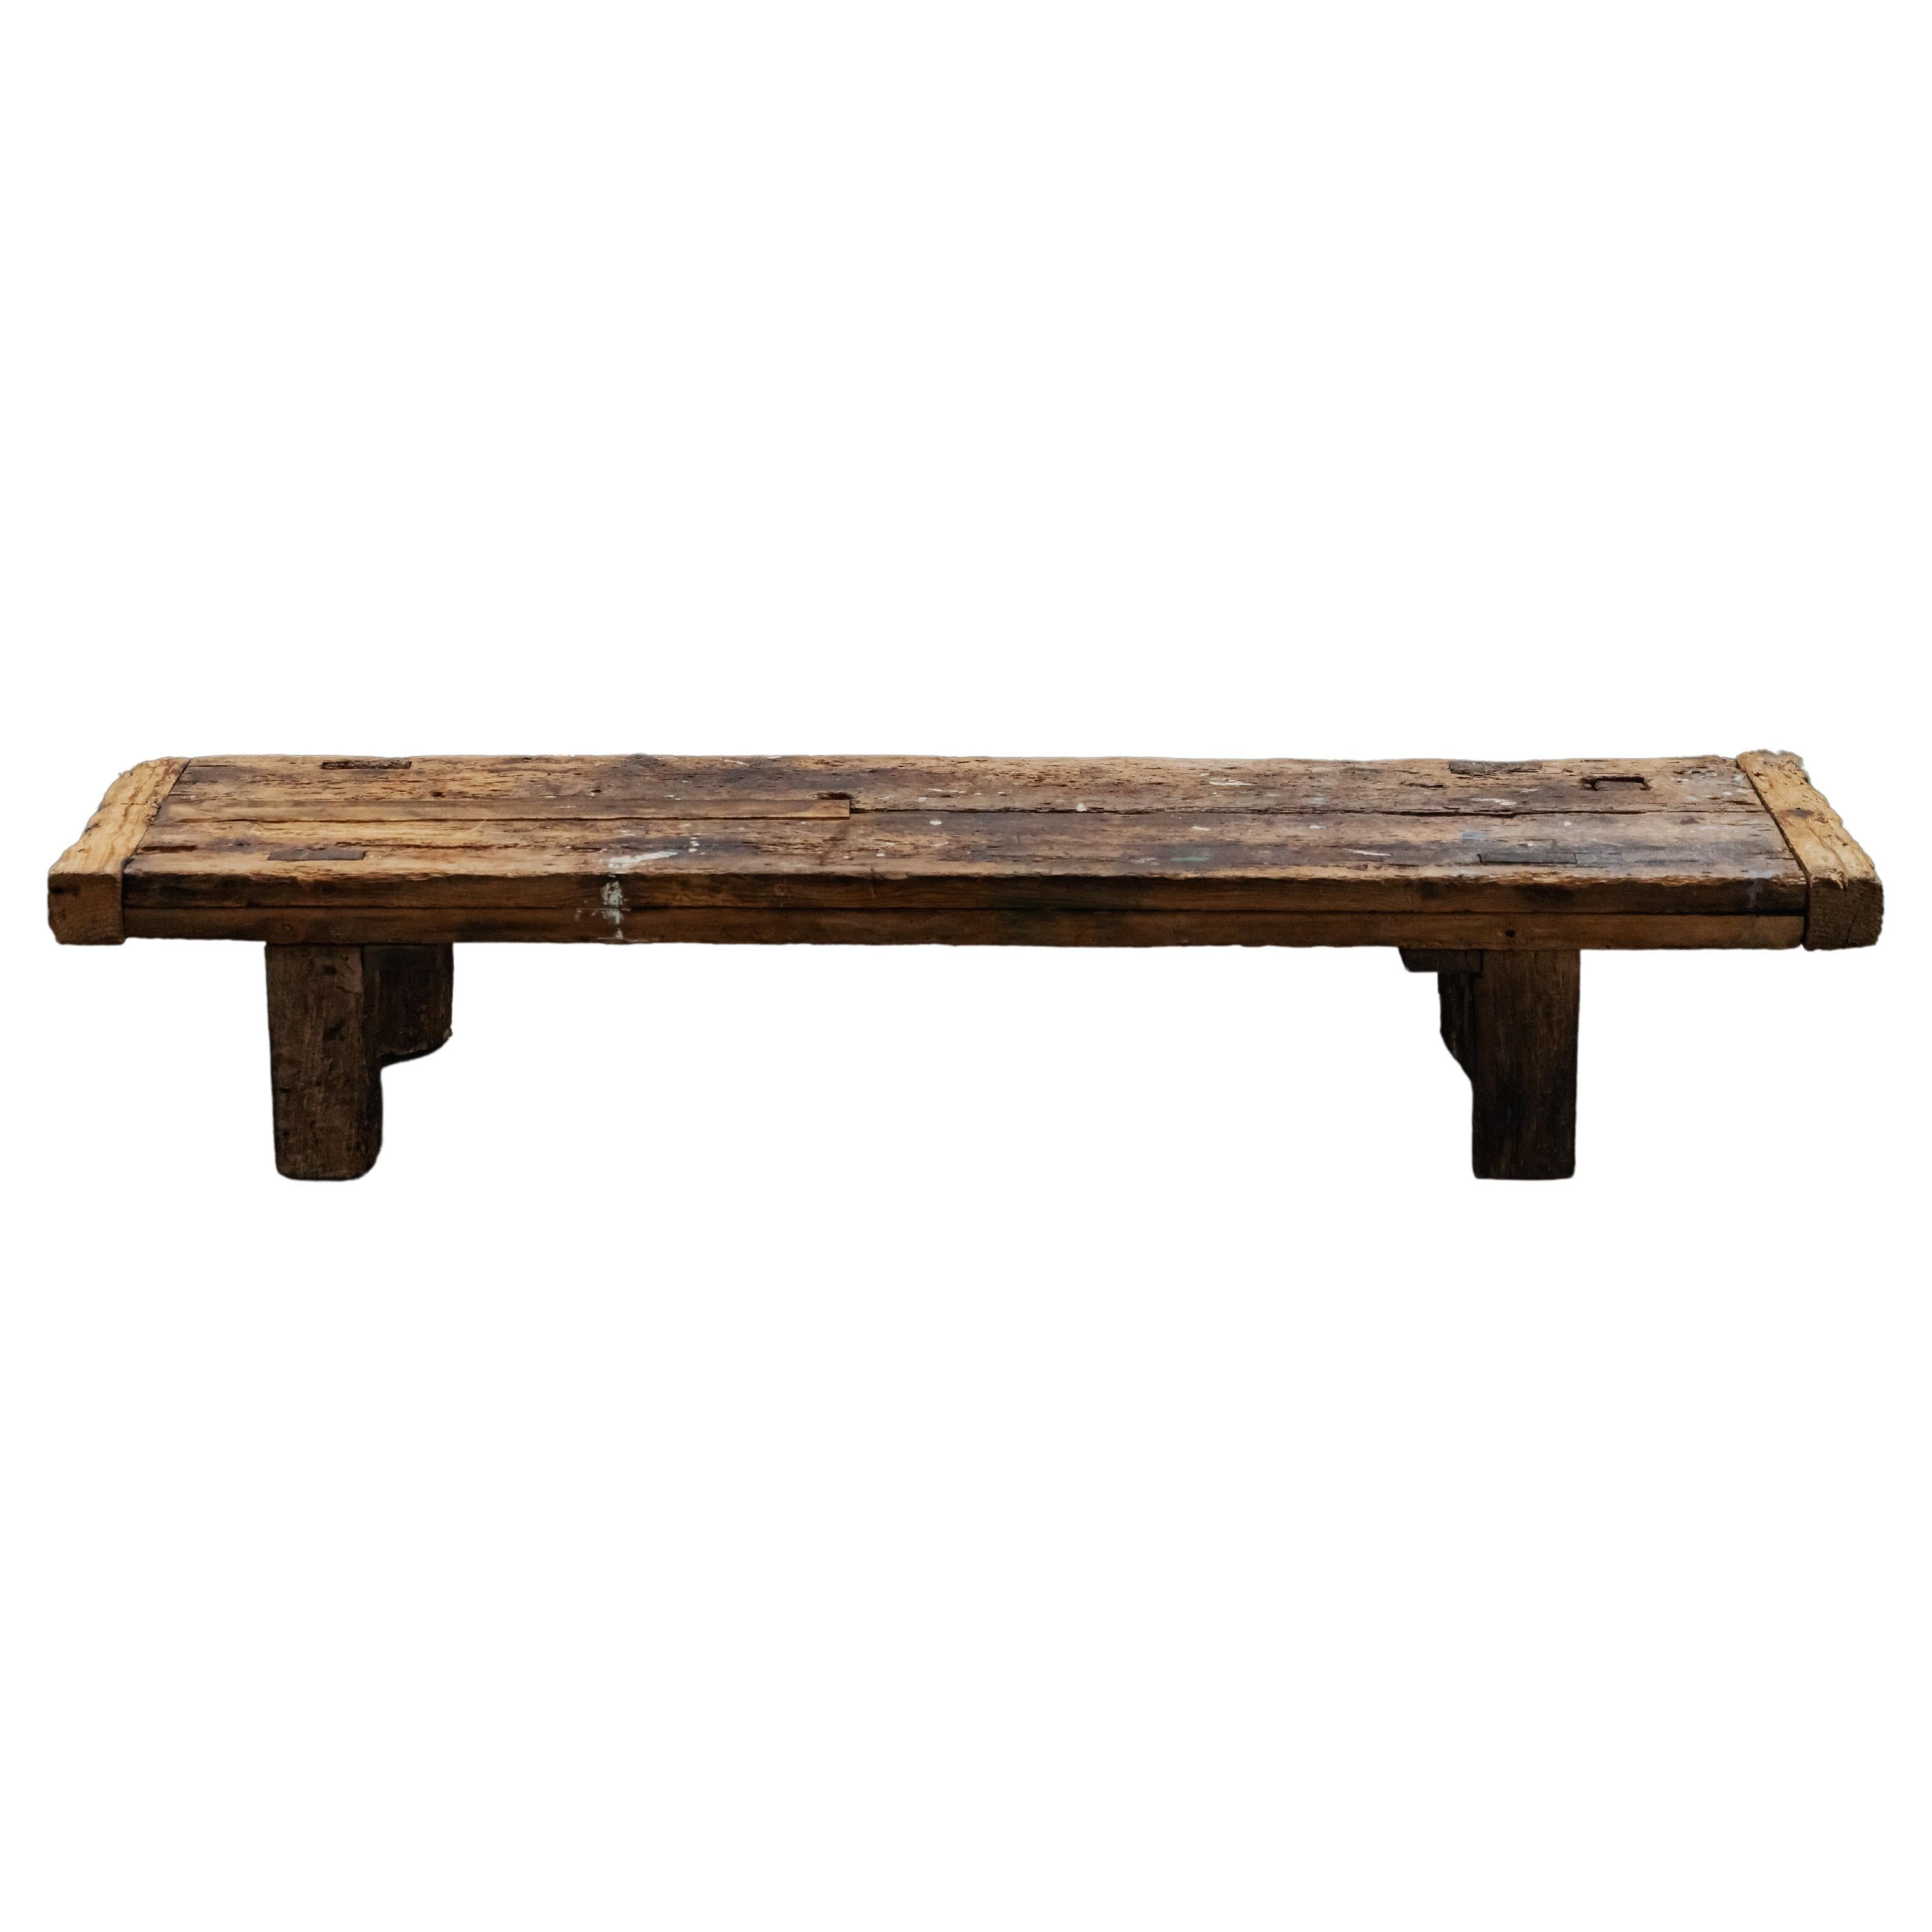 Primitive Work Bench Coffee Table From France, Circa 1900 For Sale